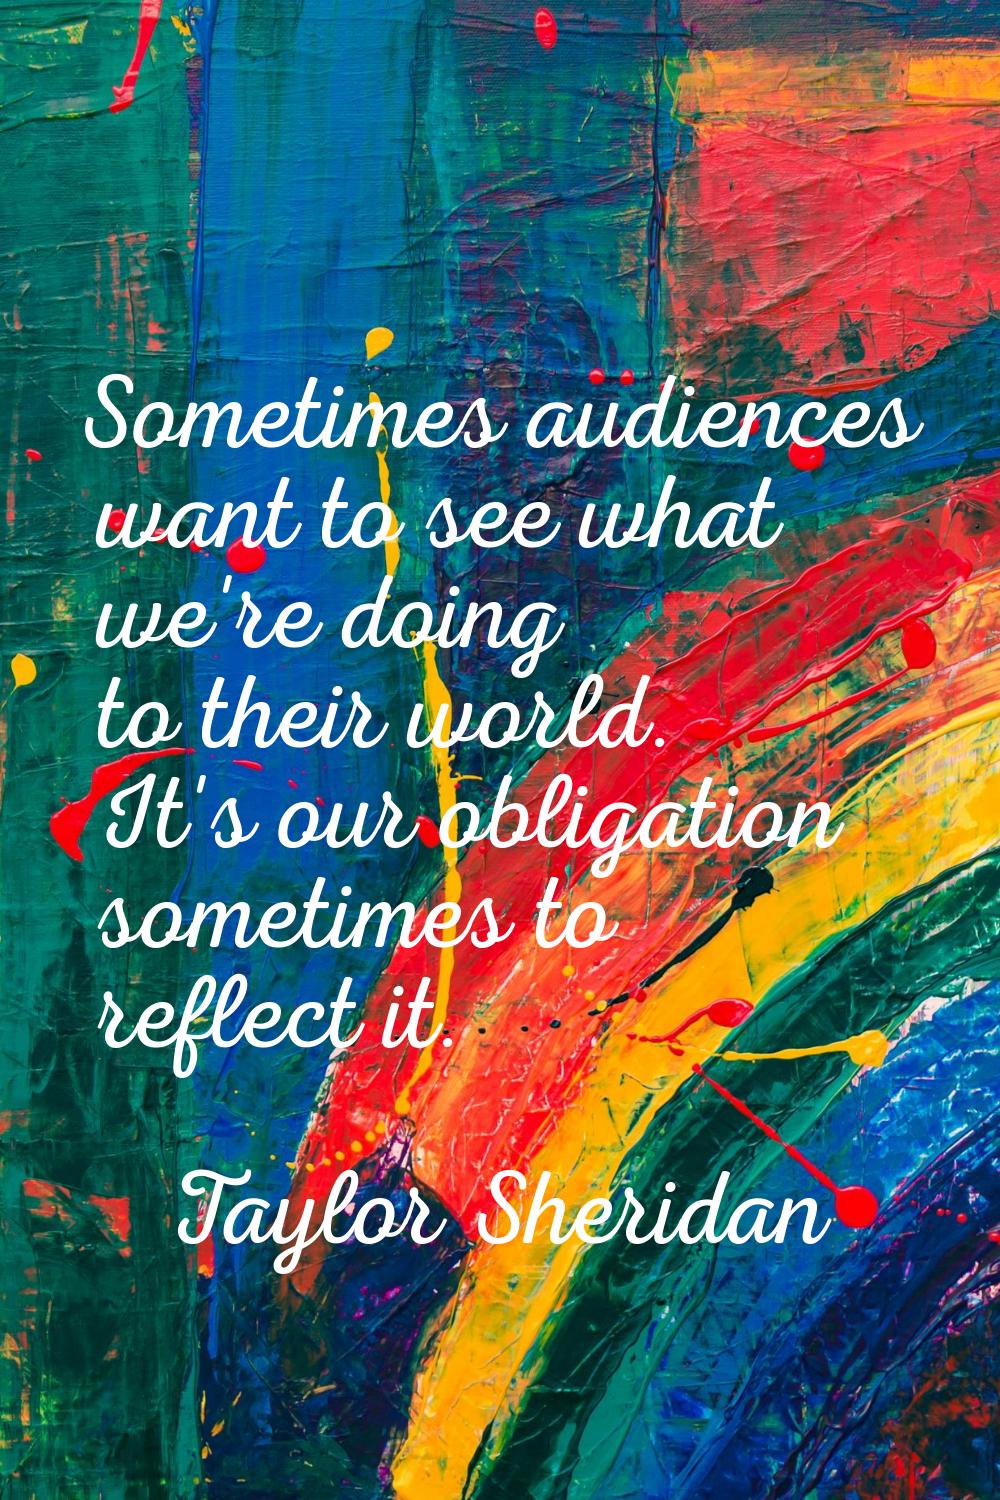 Sometimes audiences want to see what we're doing to their world. It's our obligation sometimes to r